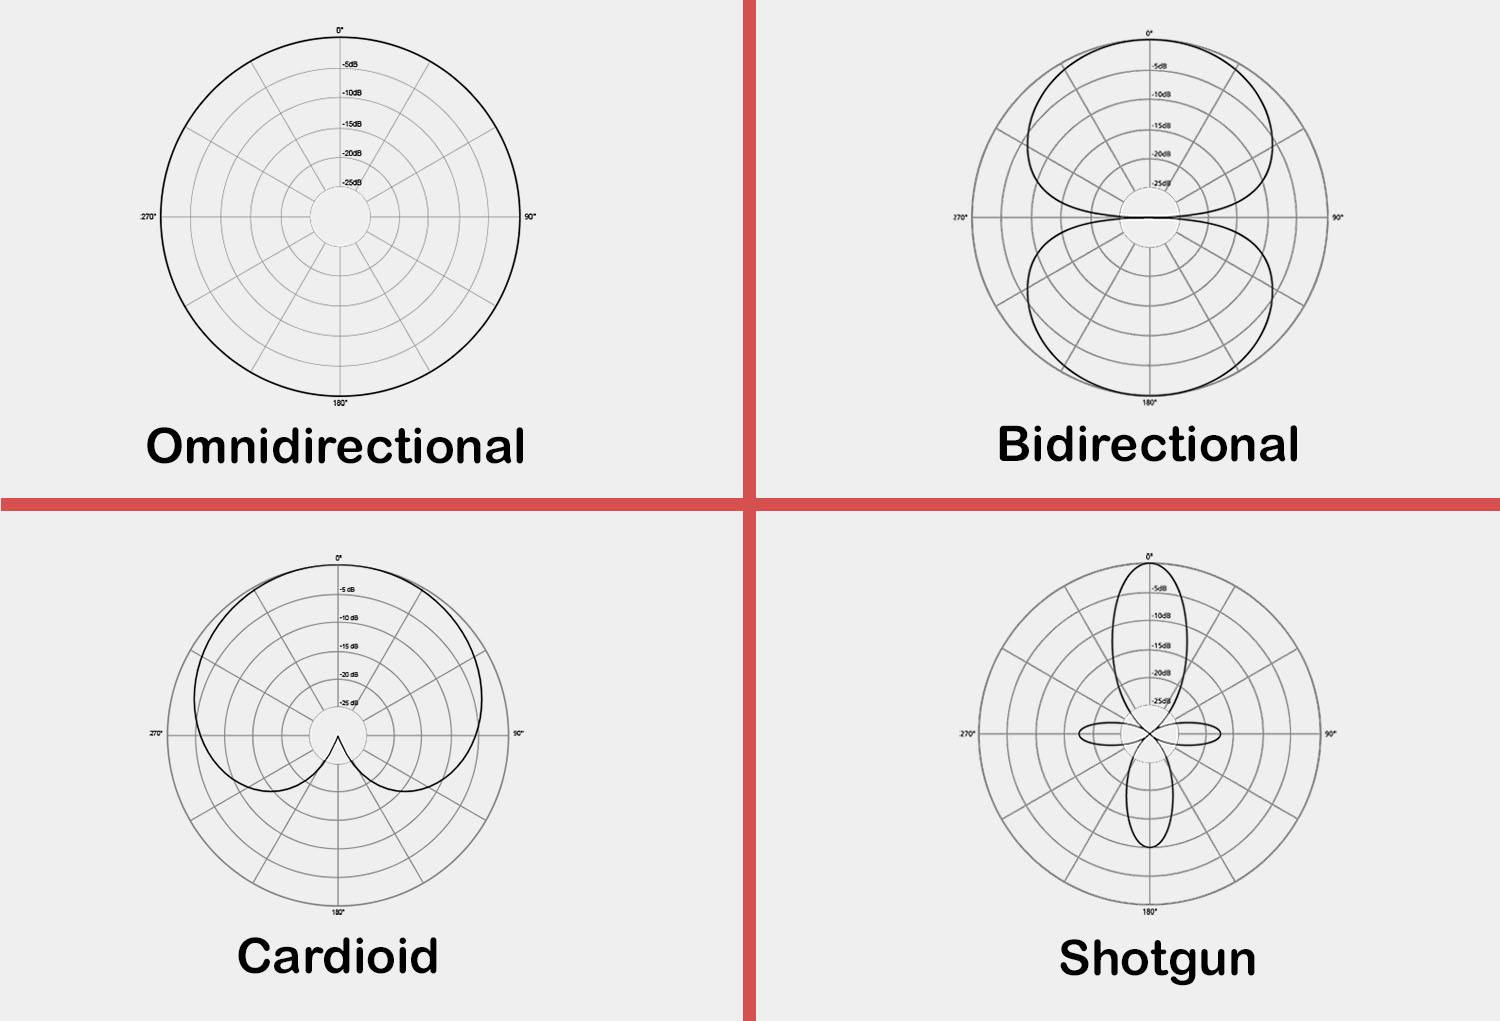 The 4 most important directional characteristics